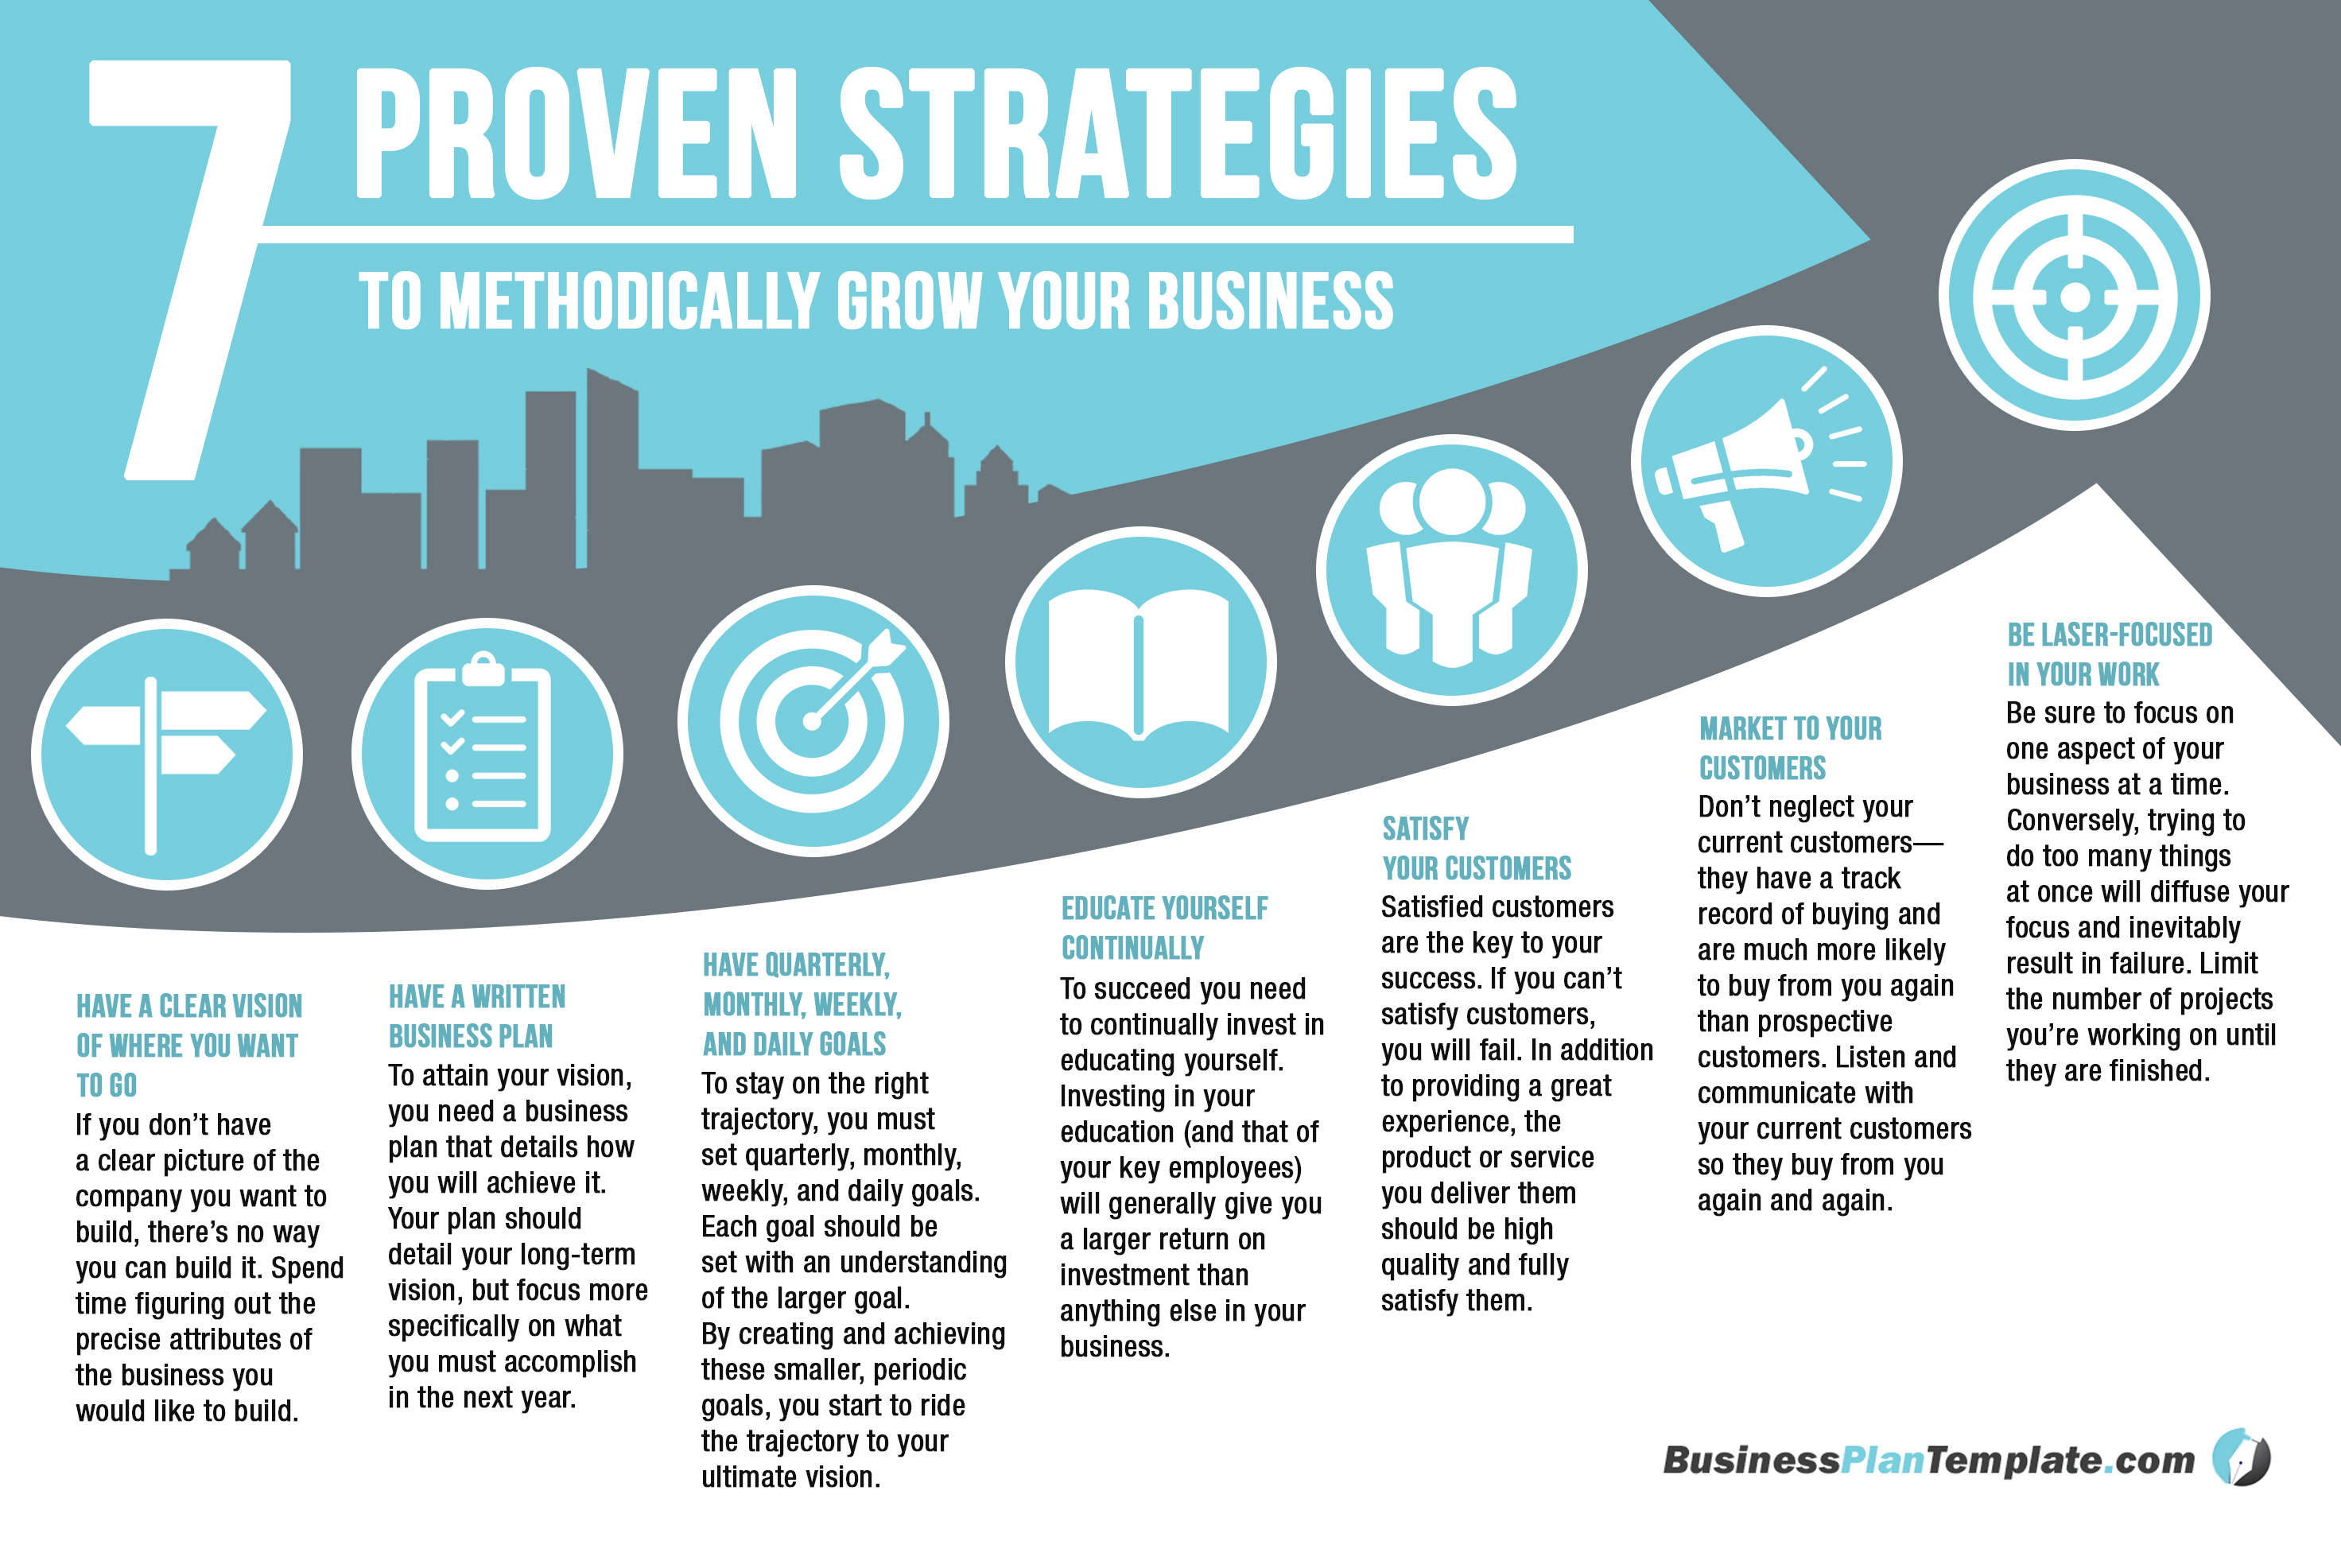 7_Proven_Strategies_to_Methodically_Grow_Your_Business_Final_Infographic